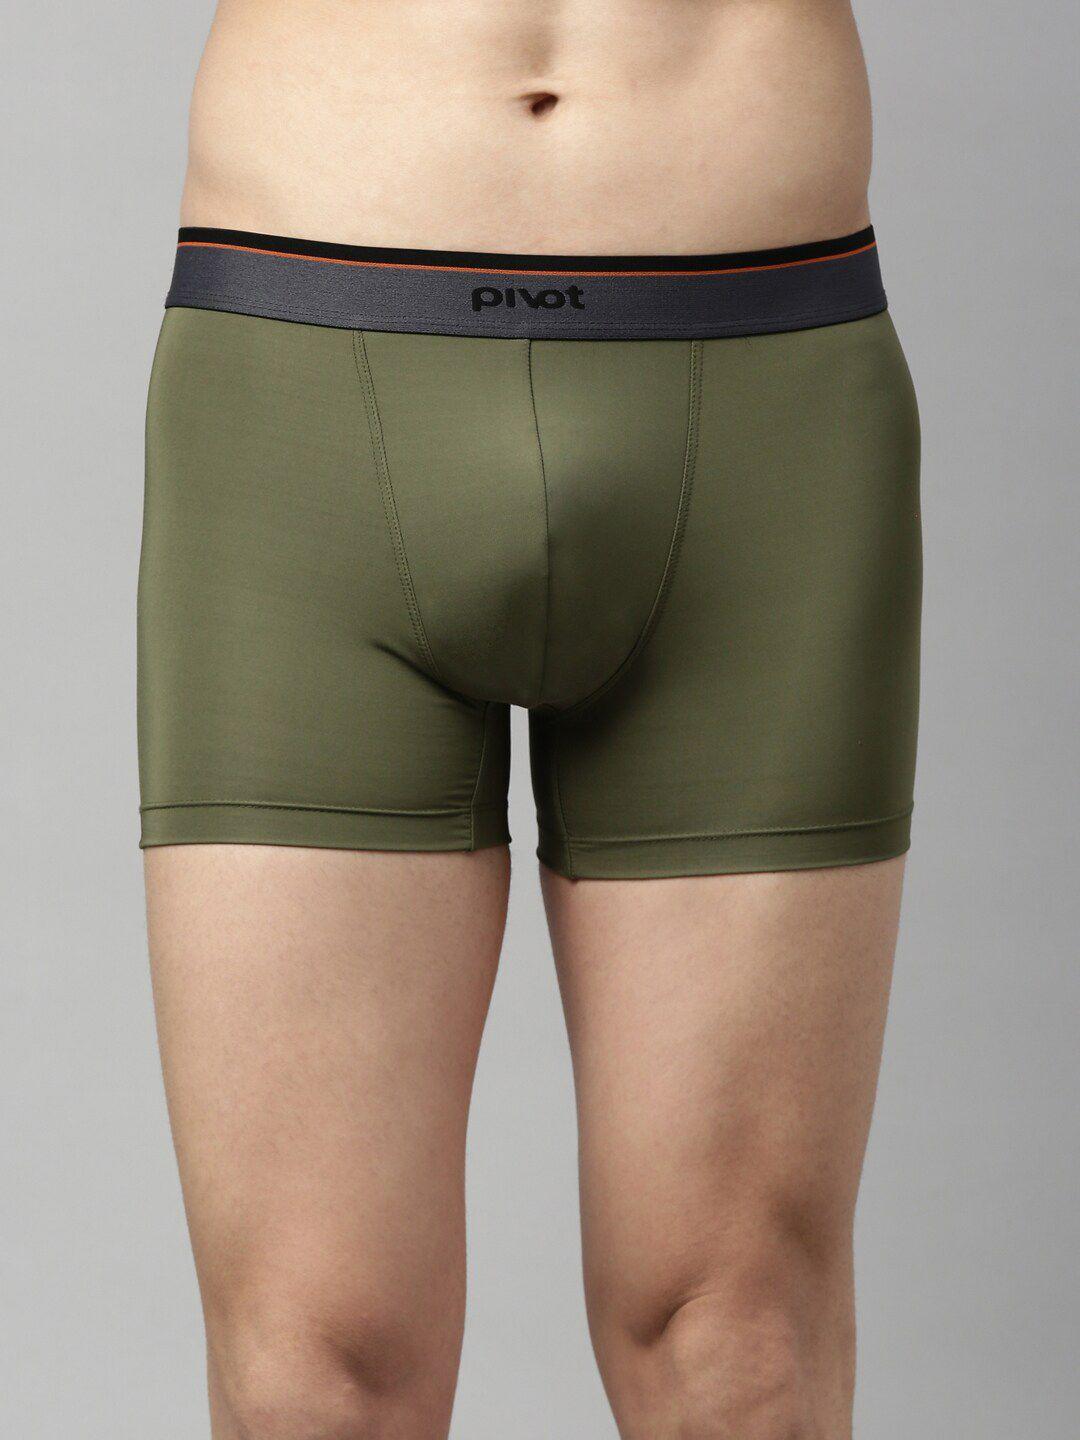 pivot men olive green solid trunks p2miwt22-021-chive